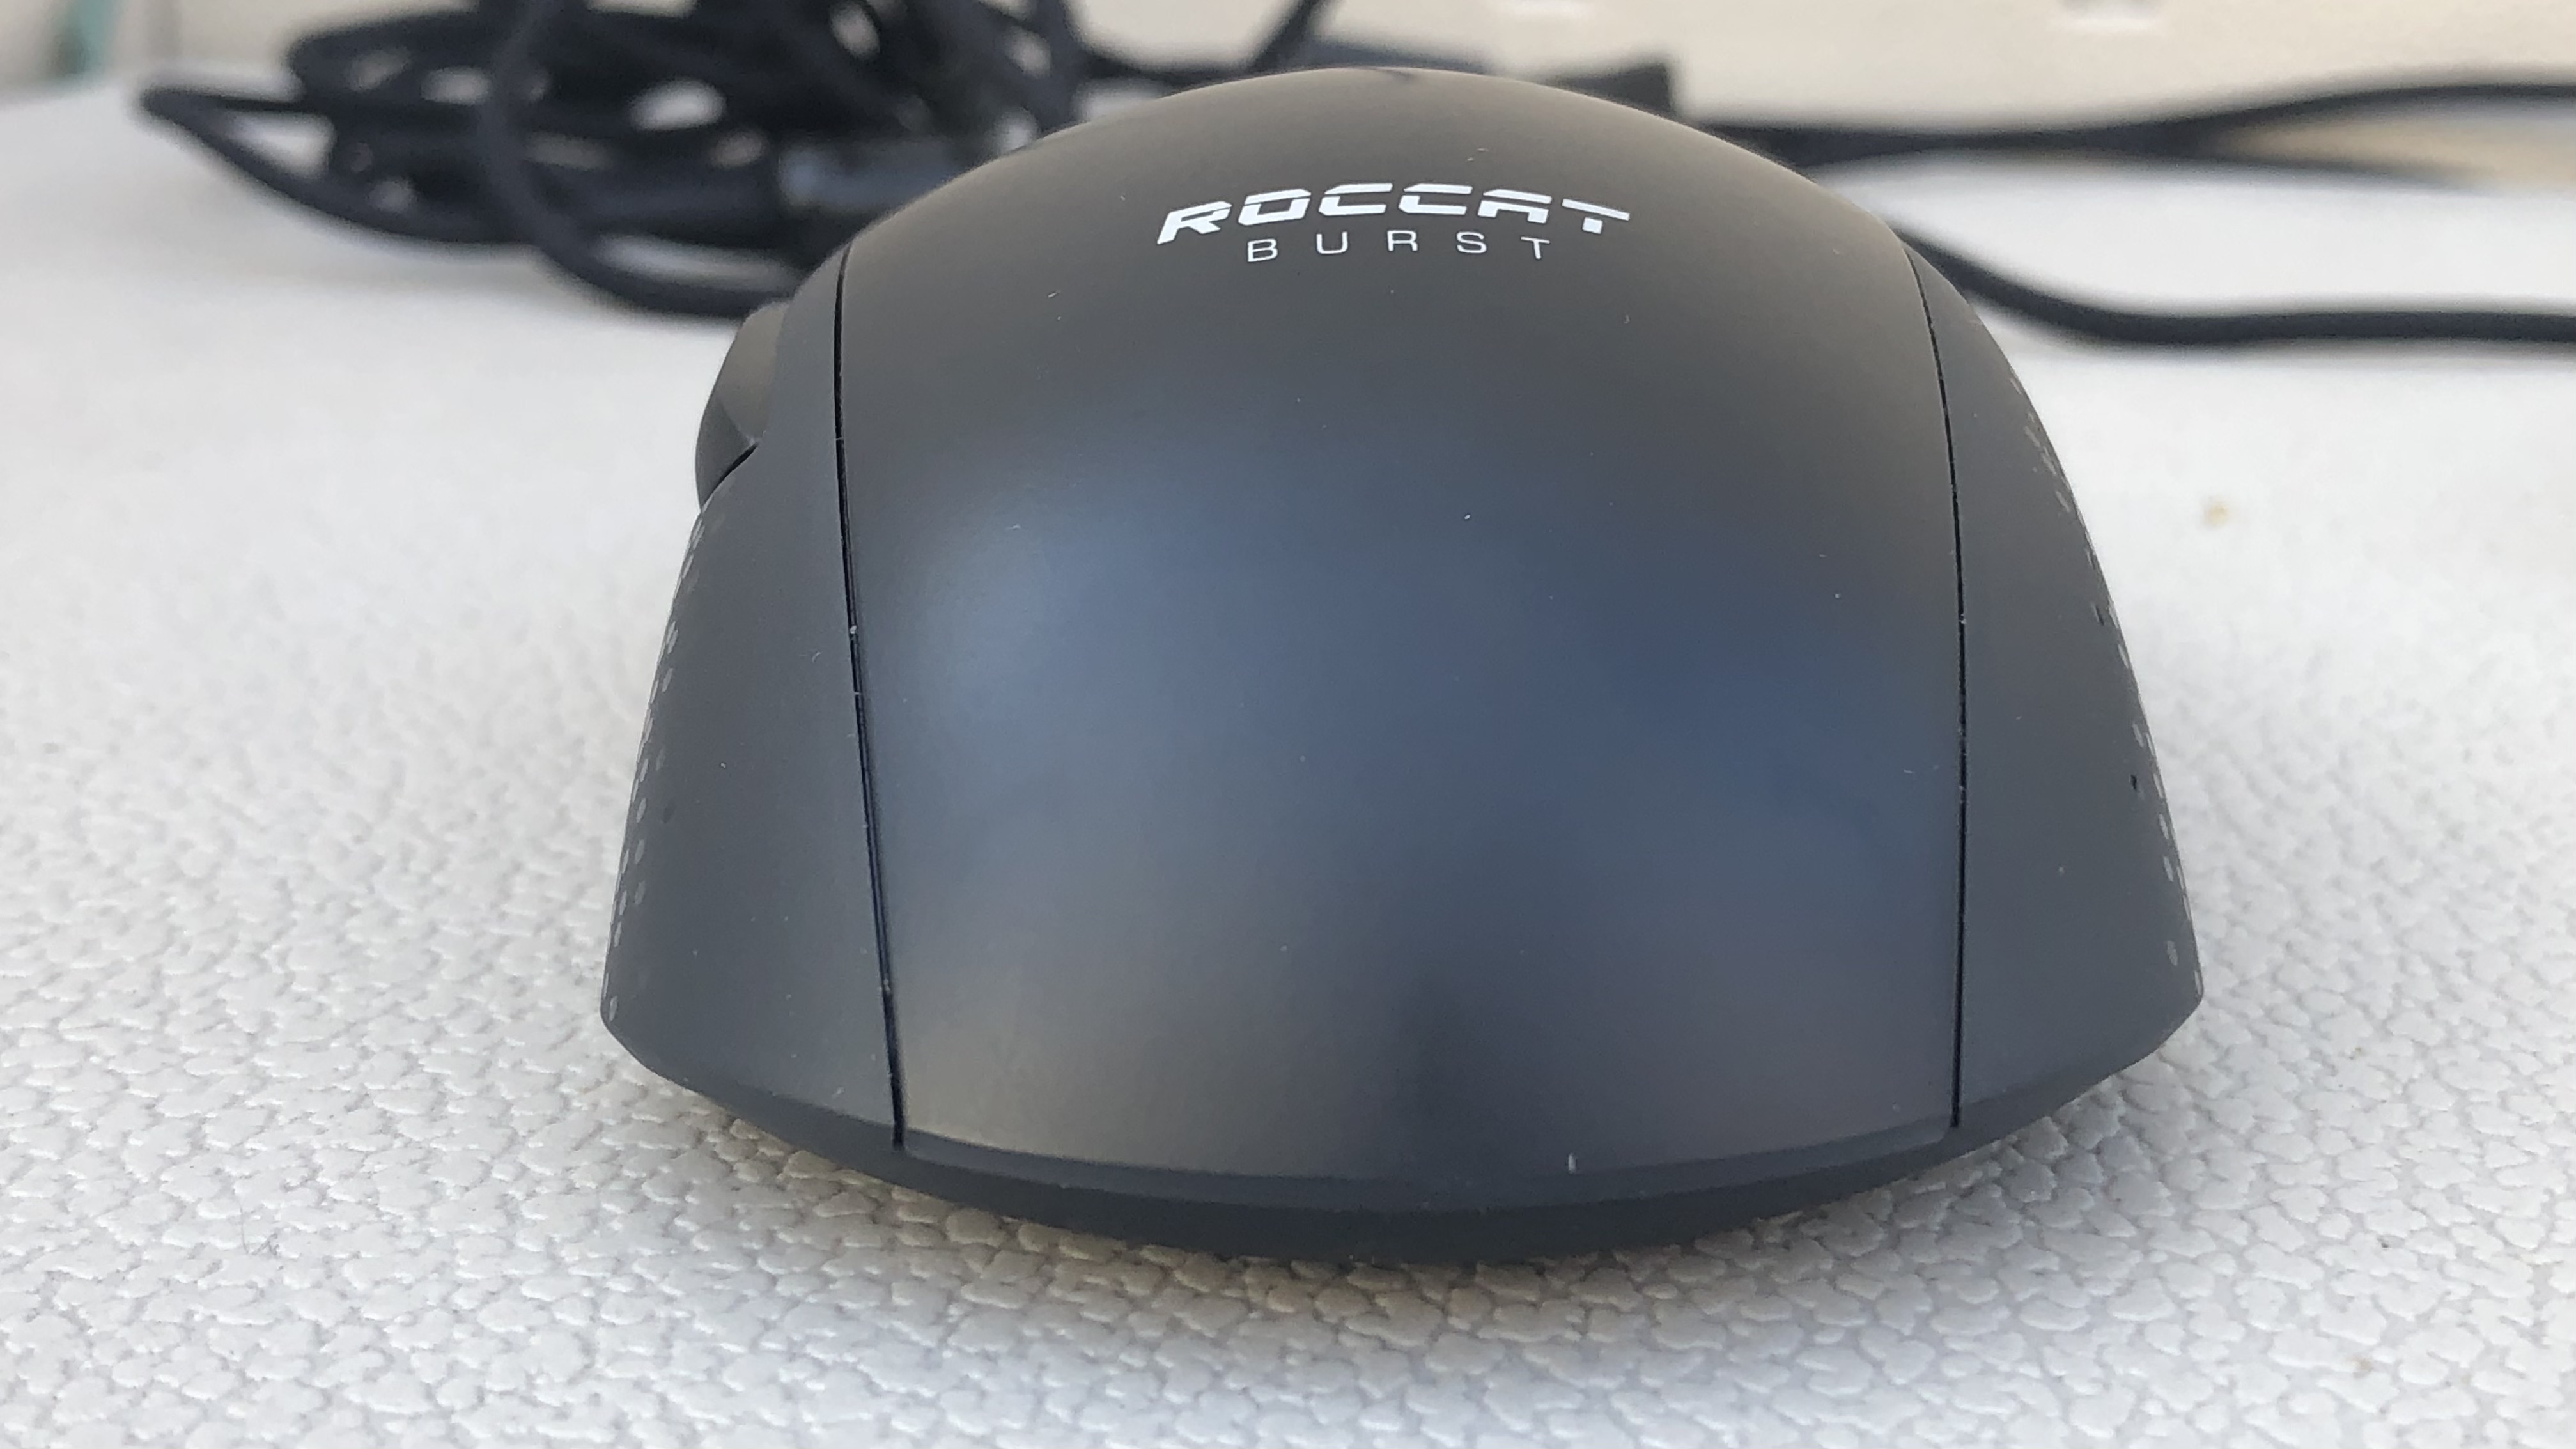 As GOOD as it gets! Roccat Burst Pro Air Gaming Mouse Review 